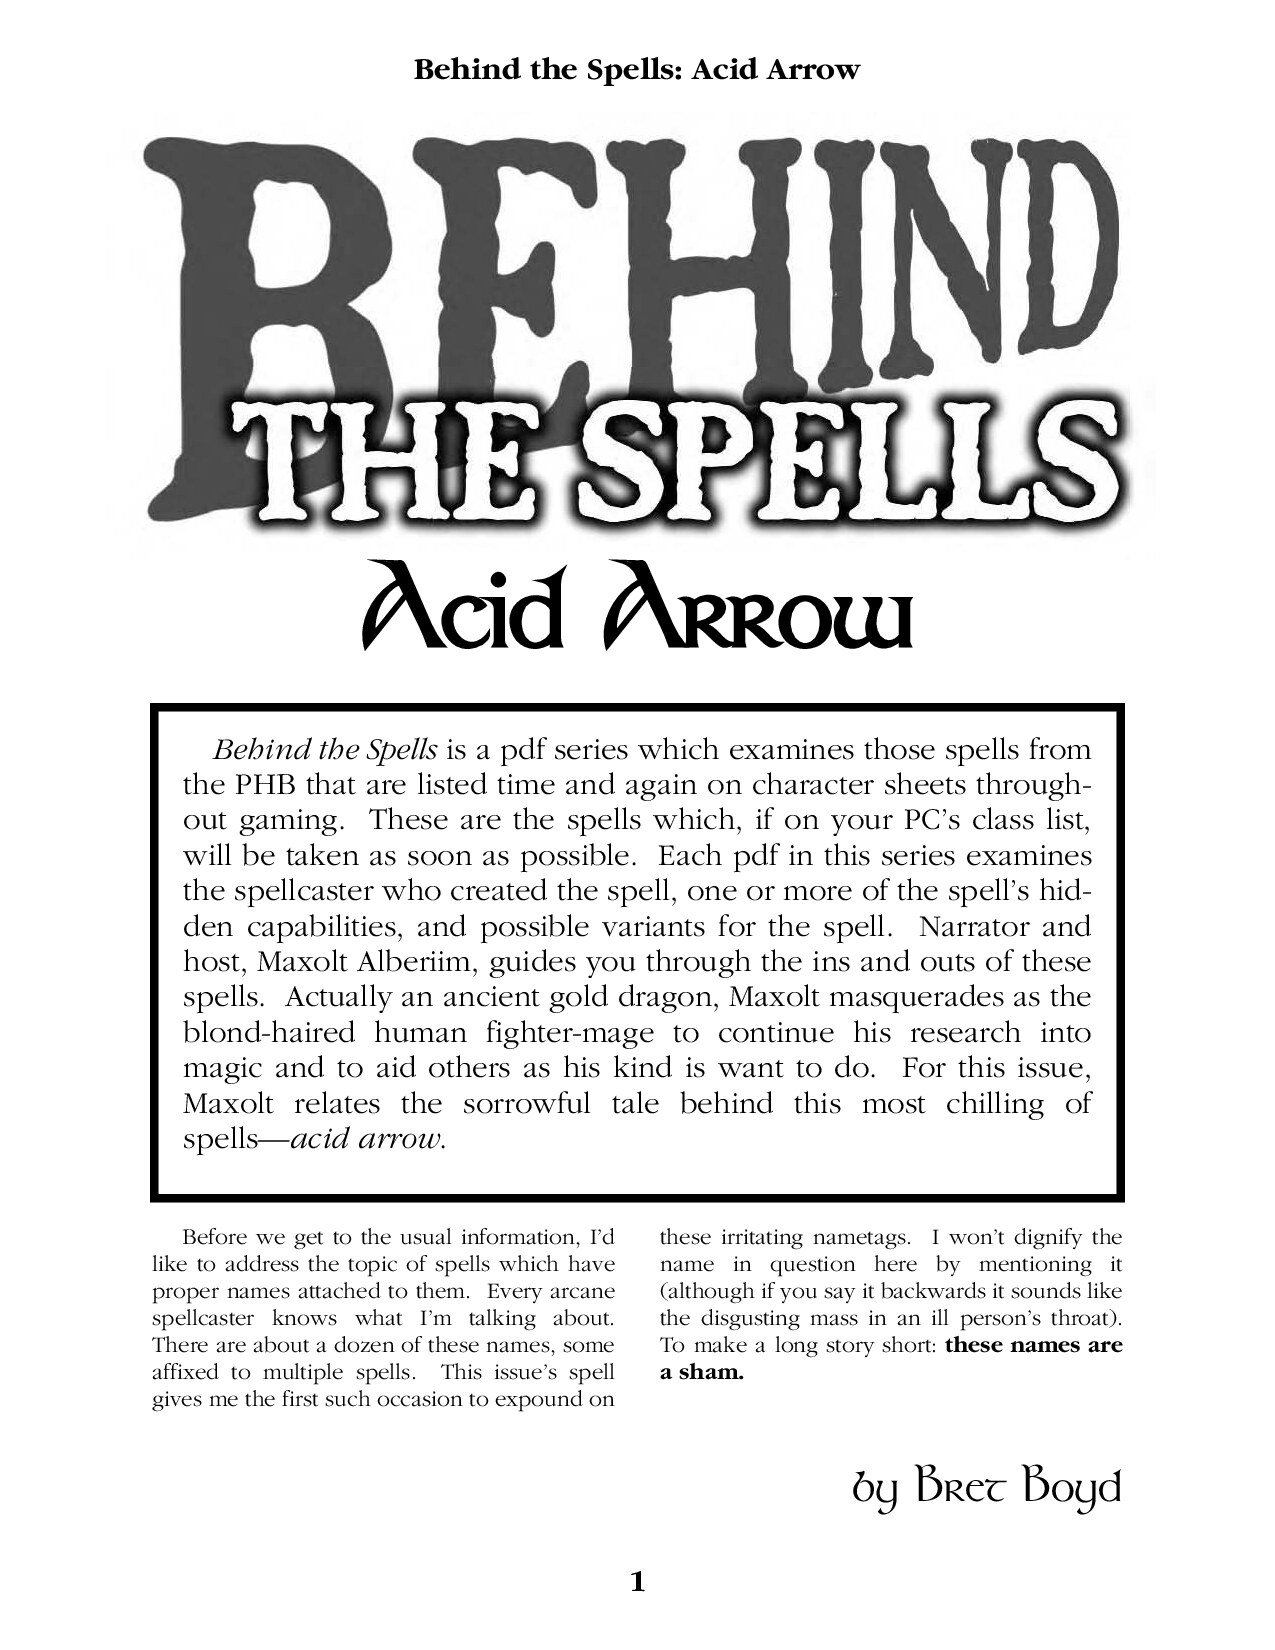 Behind The Spells. Collection